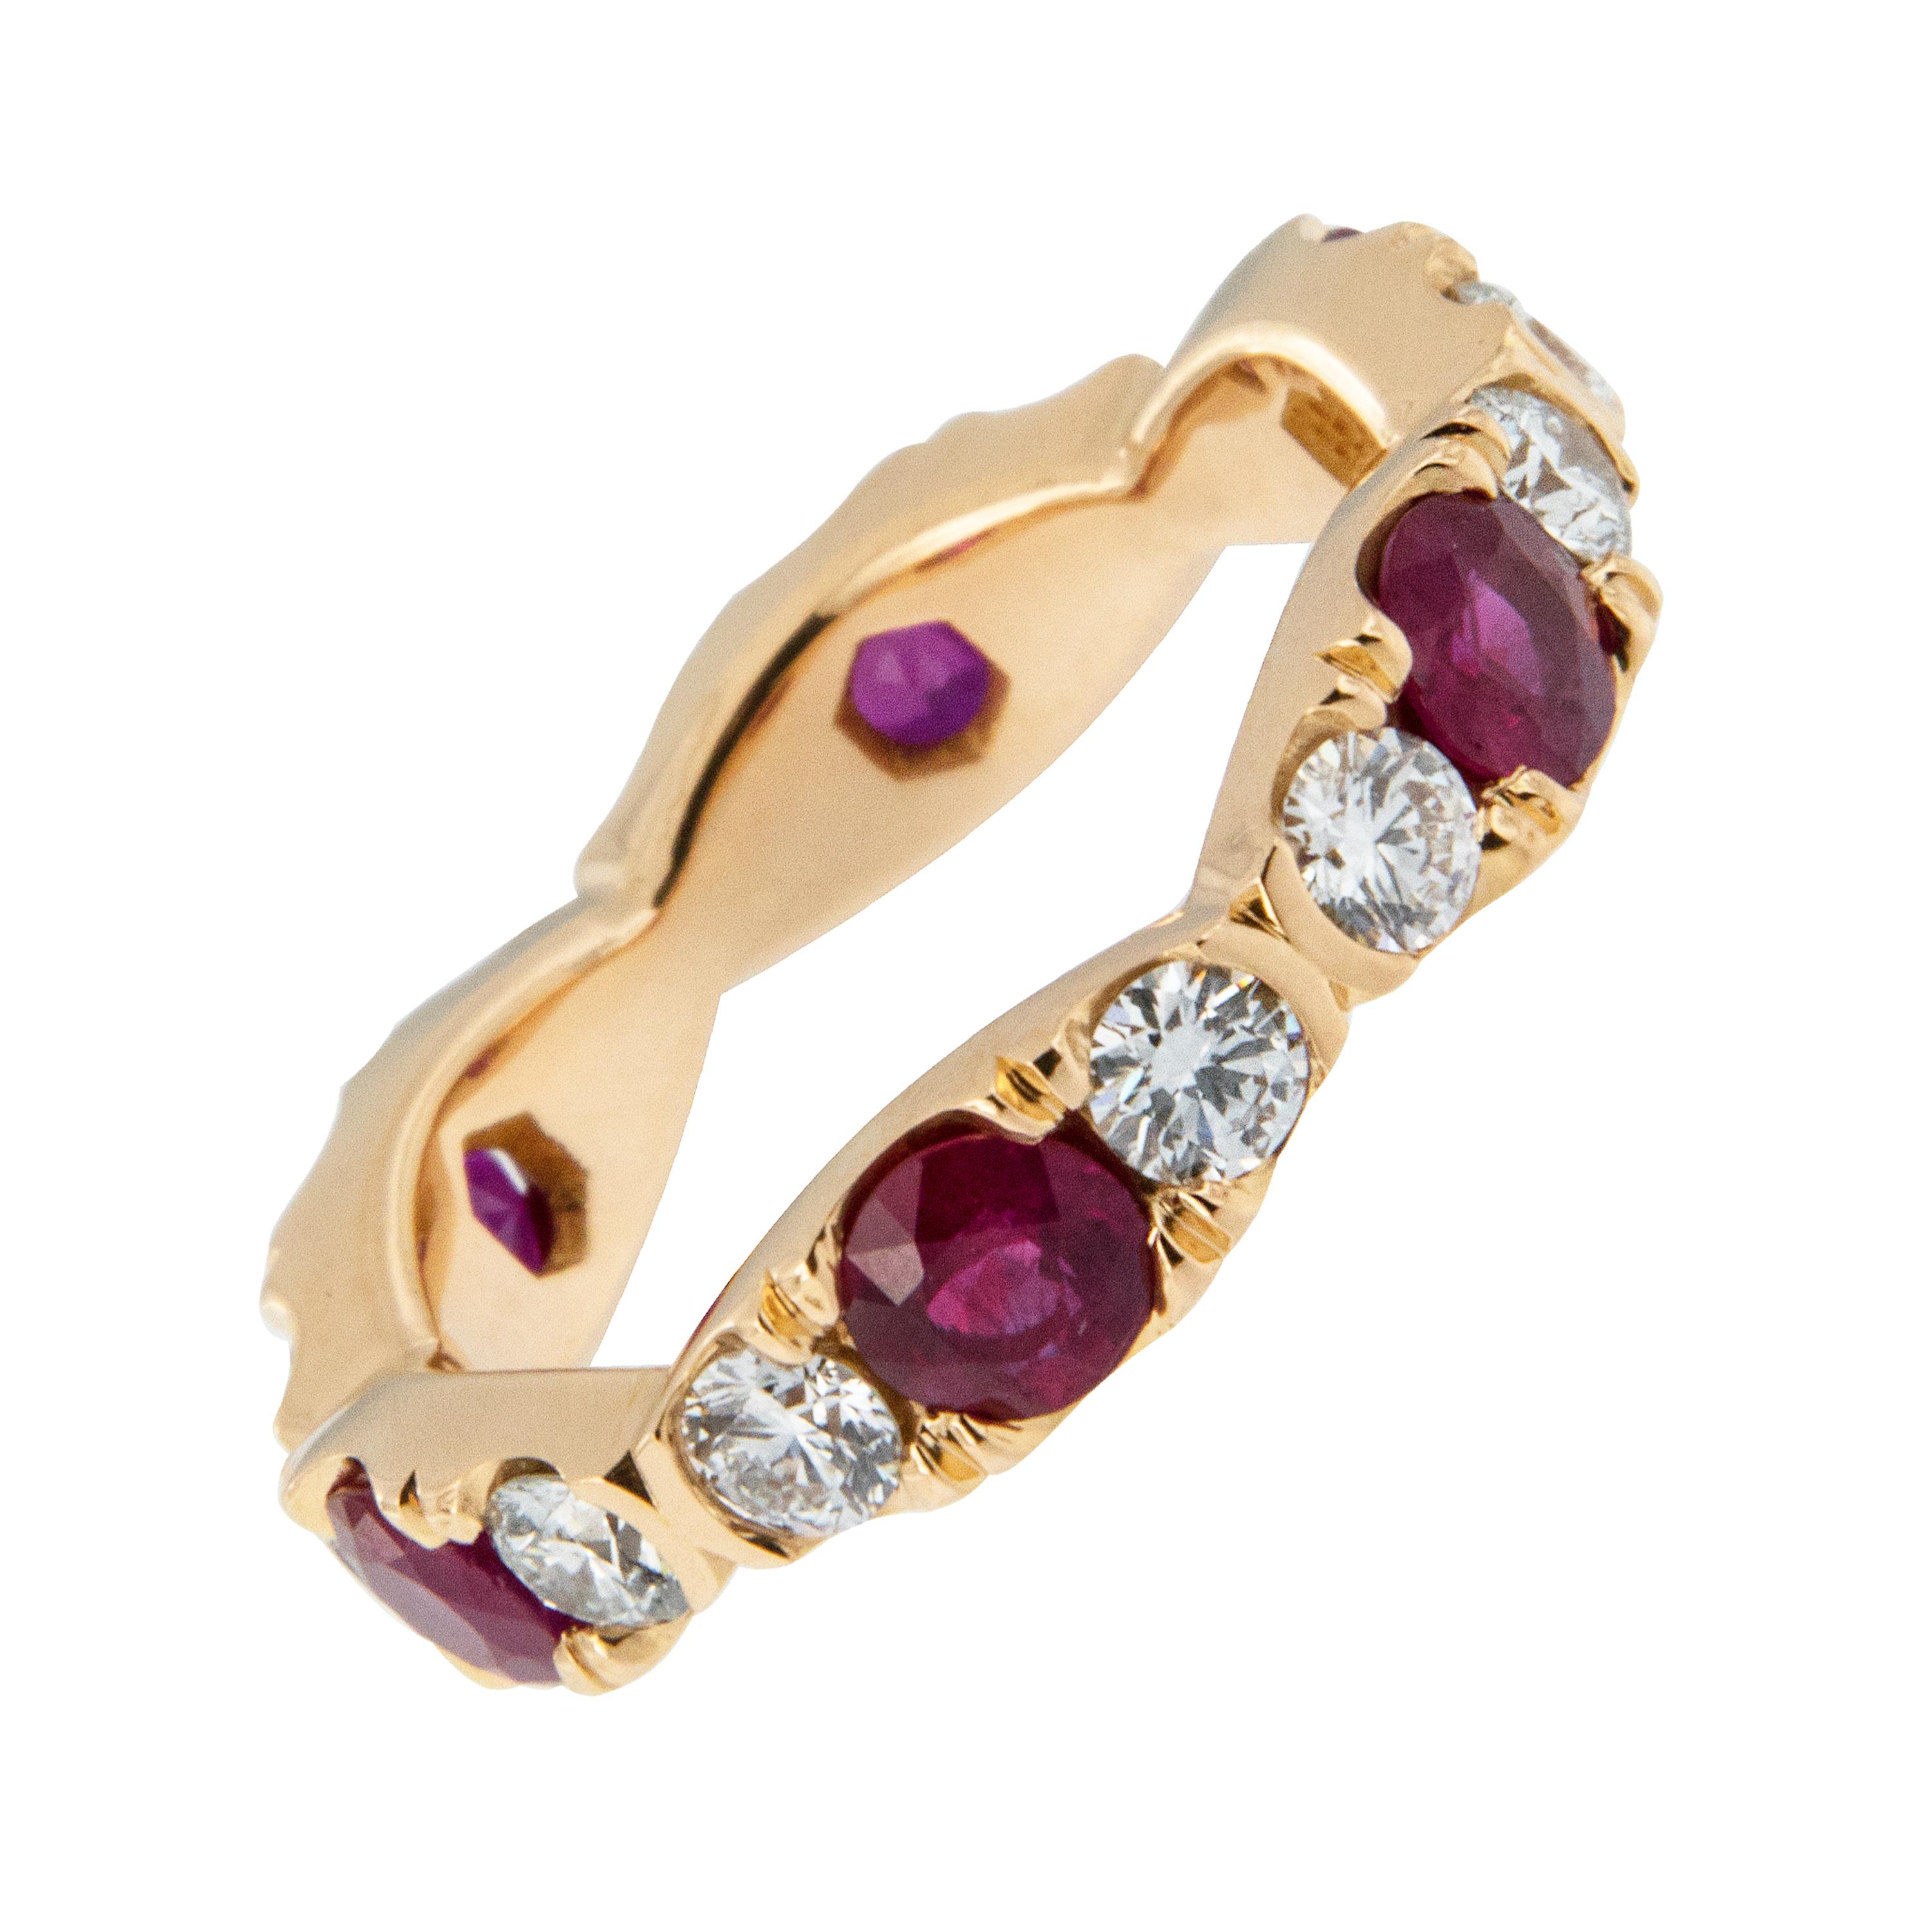 Expertly hand fabricated eternity band by William Rosenberg made from rare 20 karat gorgeous colored rose gold with 1.59 Cttw rubies & 1.05 Cttw diamonds showing hearts & arrows of VVS clarity & F color.  This scalloped ring was made in a size 6 but